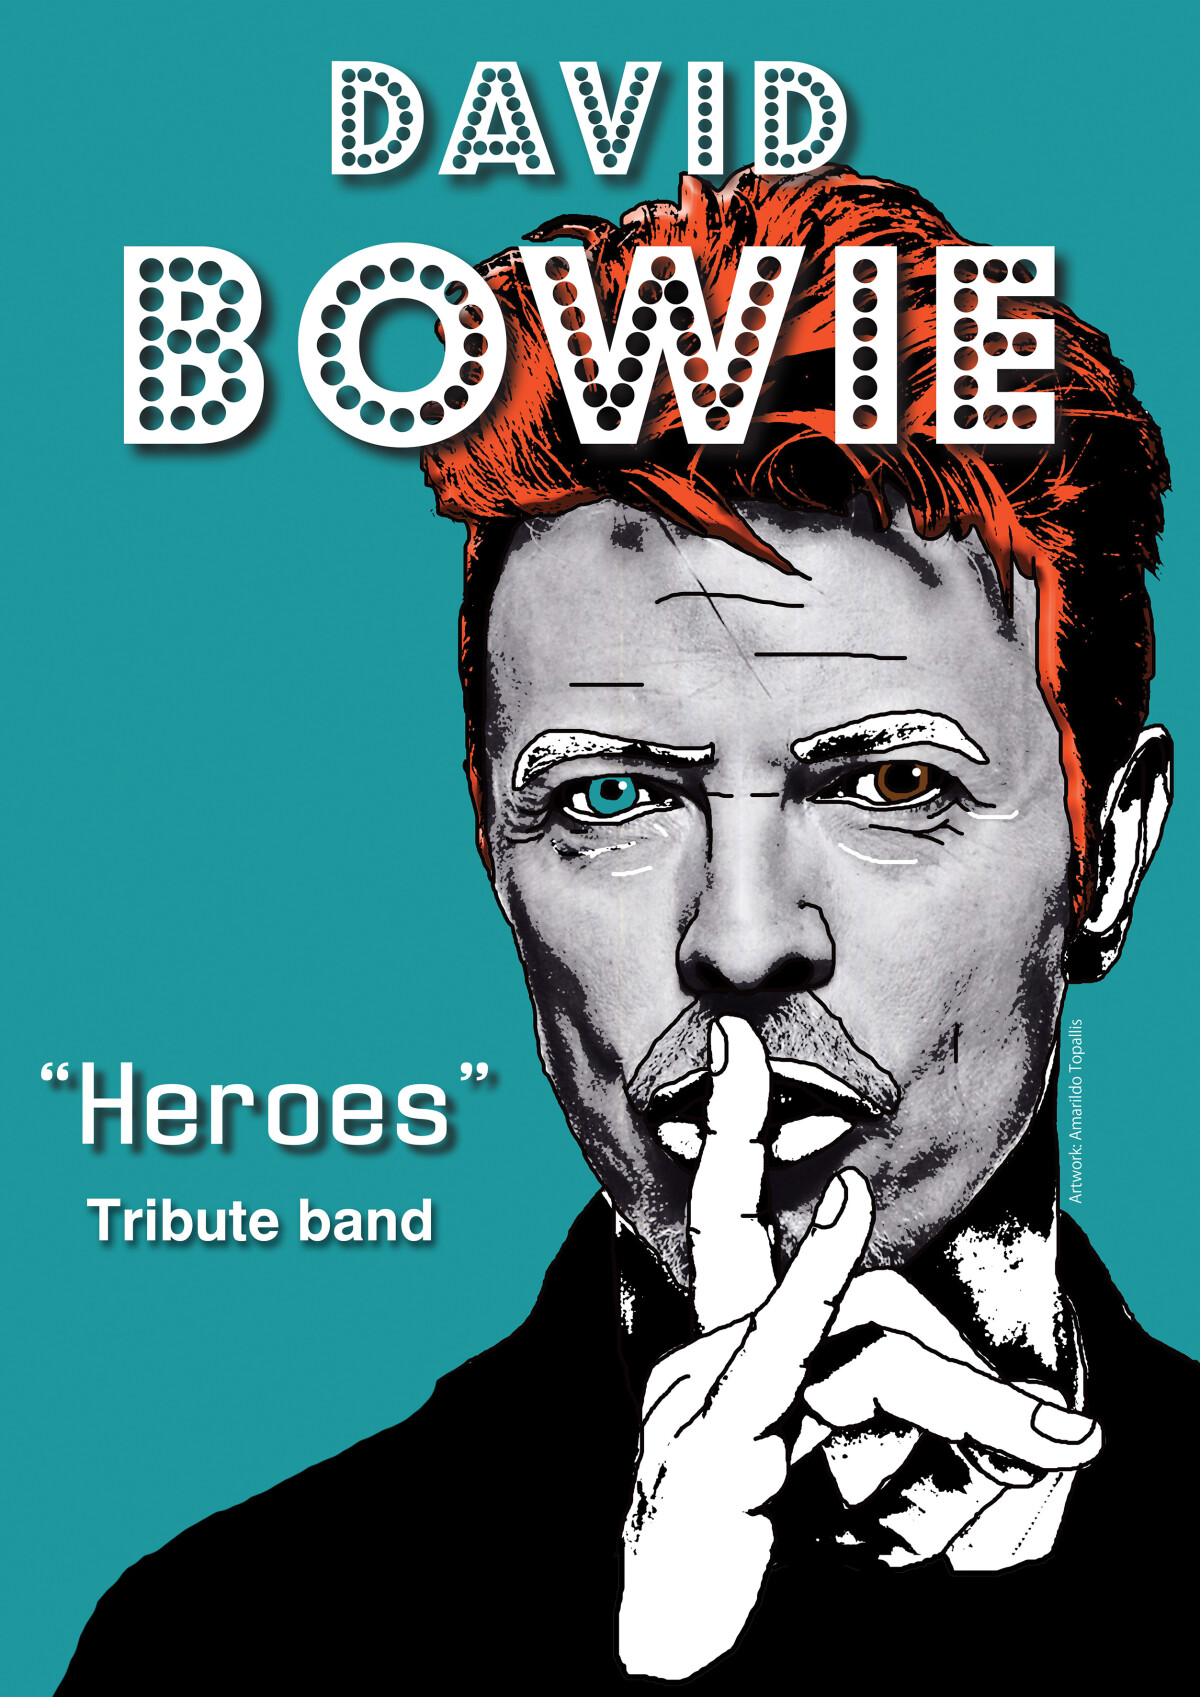 a-tribute-to-david-bowie_heroes-tribute-band